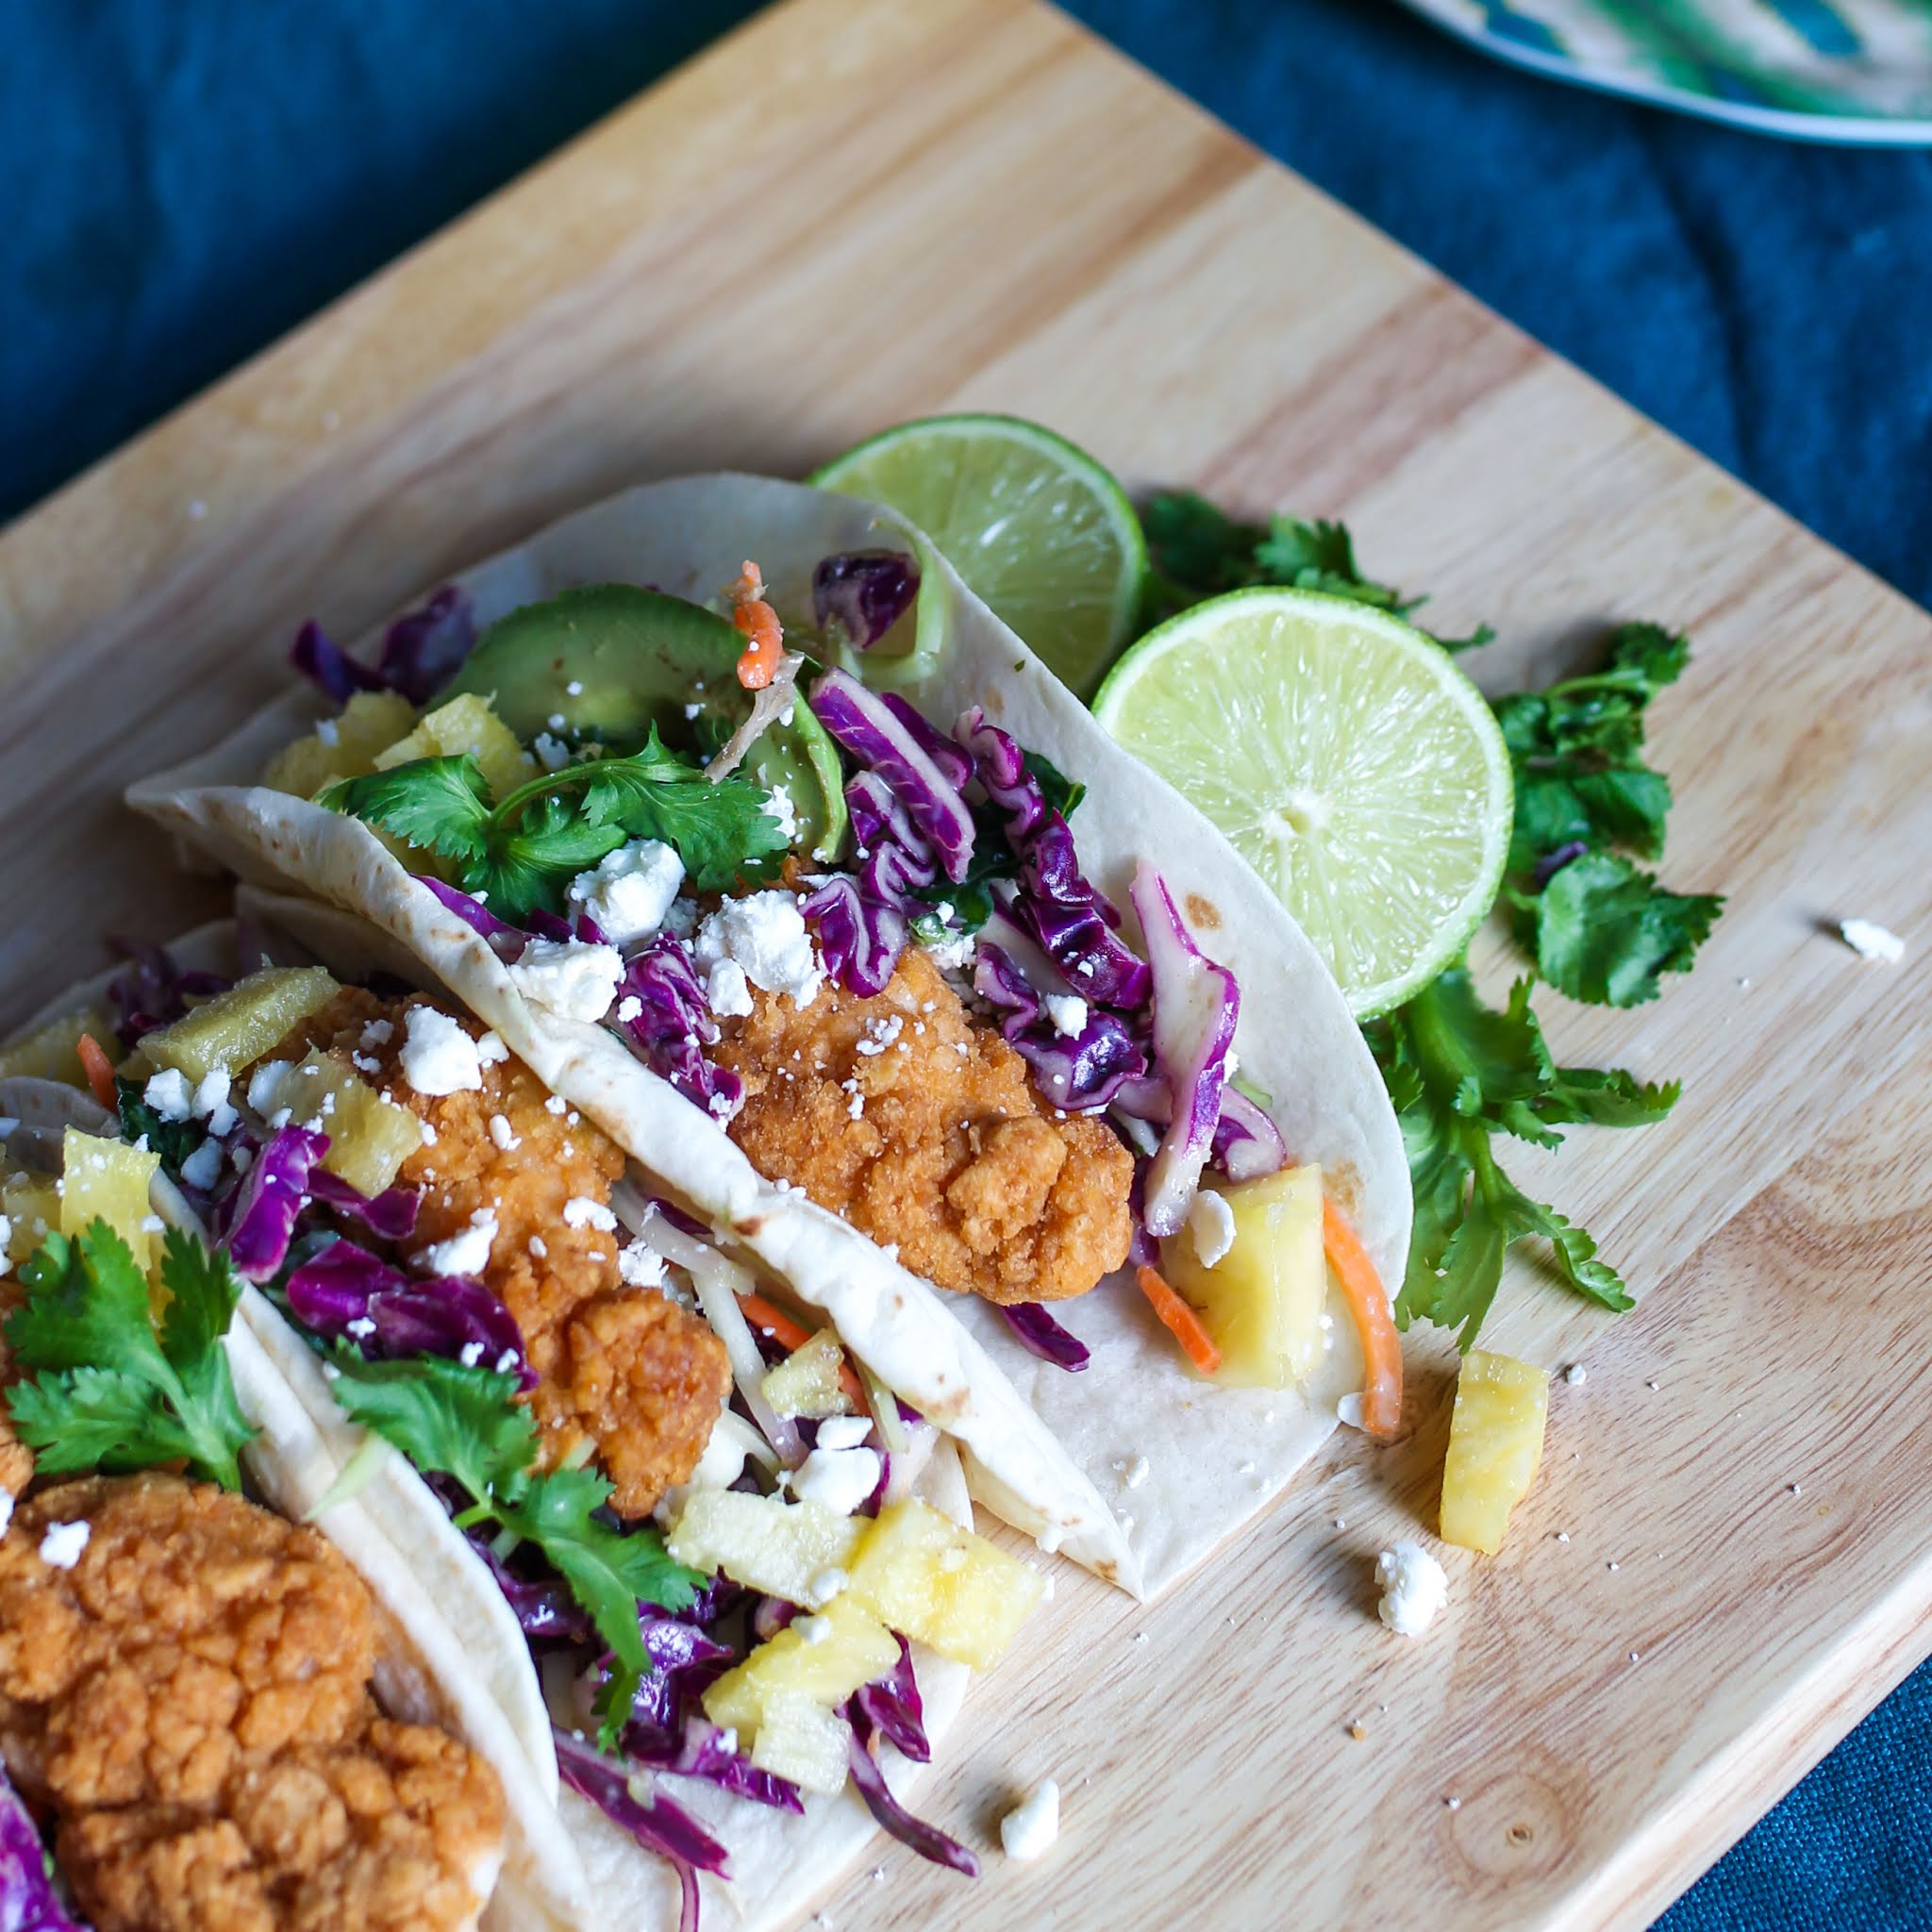 tacos // taco ideas // chicken tacos // fried chicken tacos // Tyson tenders ideas // chicken tenders recipes // what to make with chicken tenders // chicken tenders // chicken tacos recipes // easy meals // kid friendly meals // week night meal ideas // quick and easy meal ideas // easy meal ideas